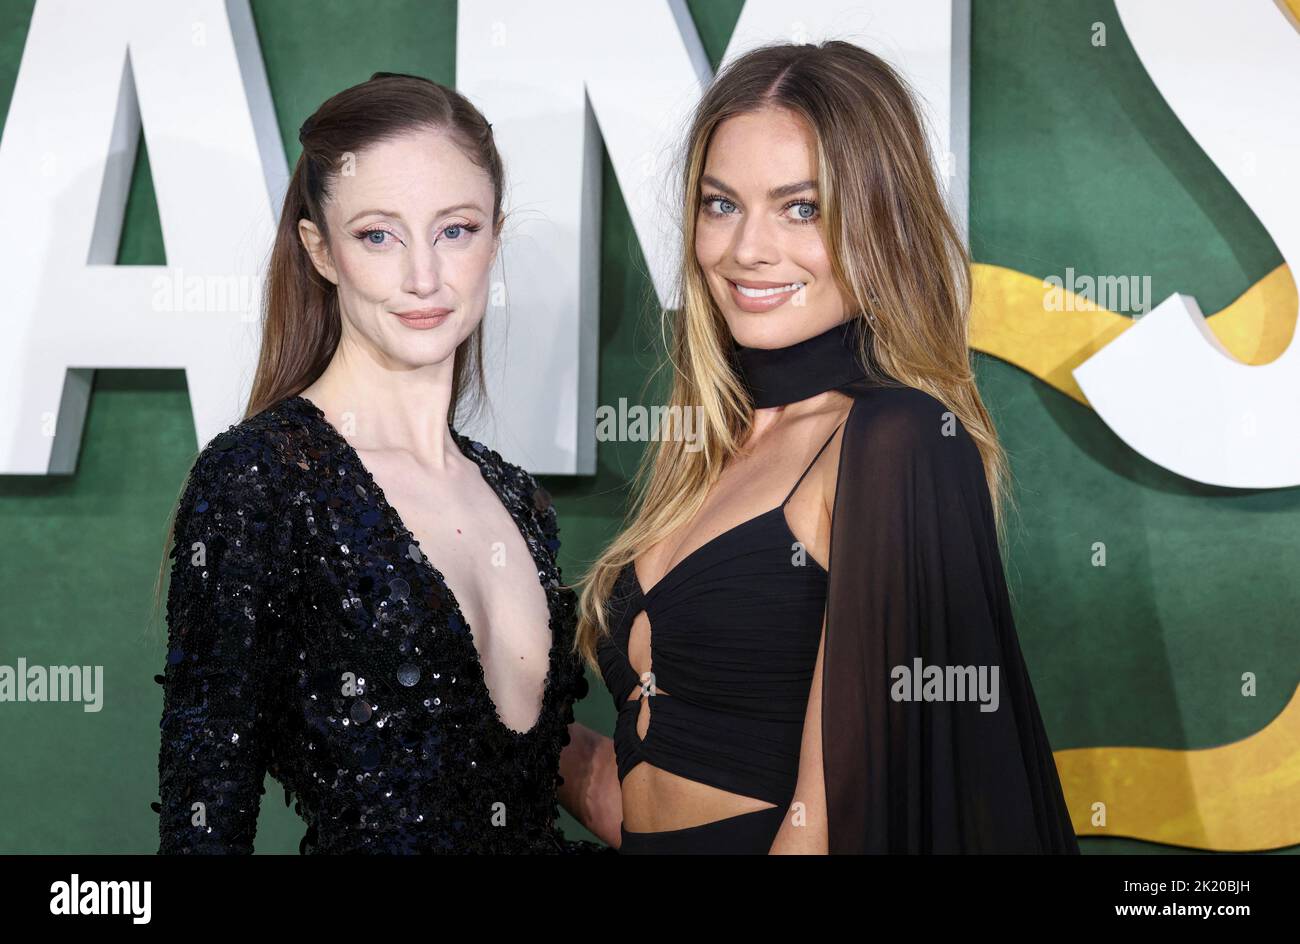 Cast members Andrea Riseborough and Margot Robbie attends the European premiere of the film 'Amsterdam', in London, Britain September 21, 2022. REUTERS/Tom Nicholson Stock Photo